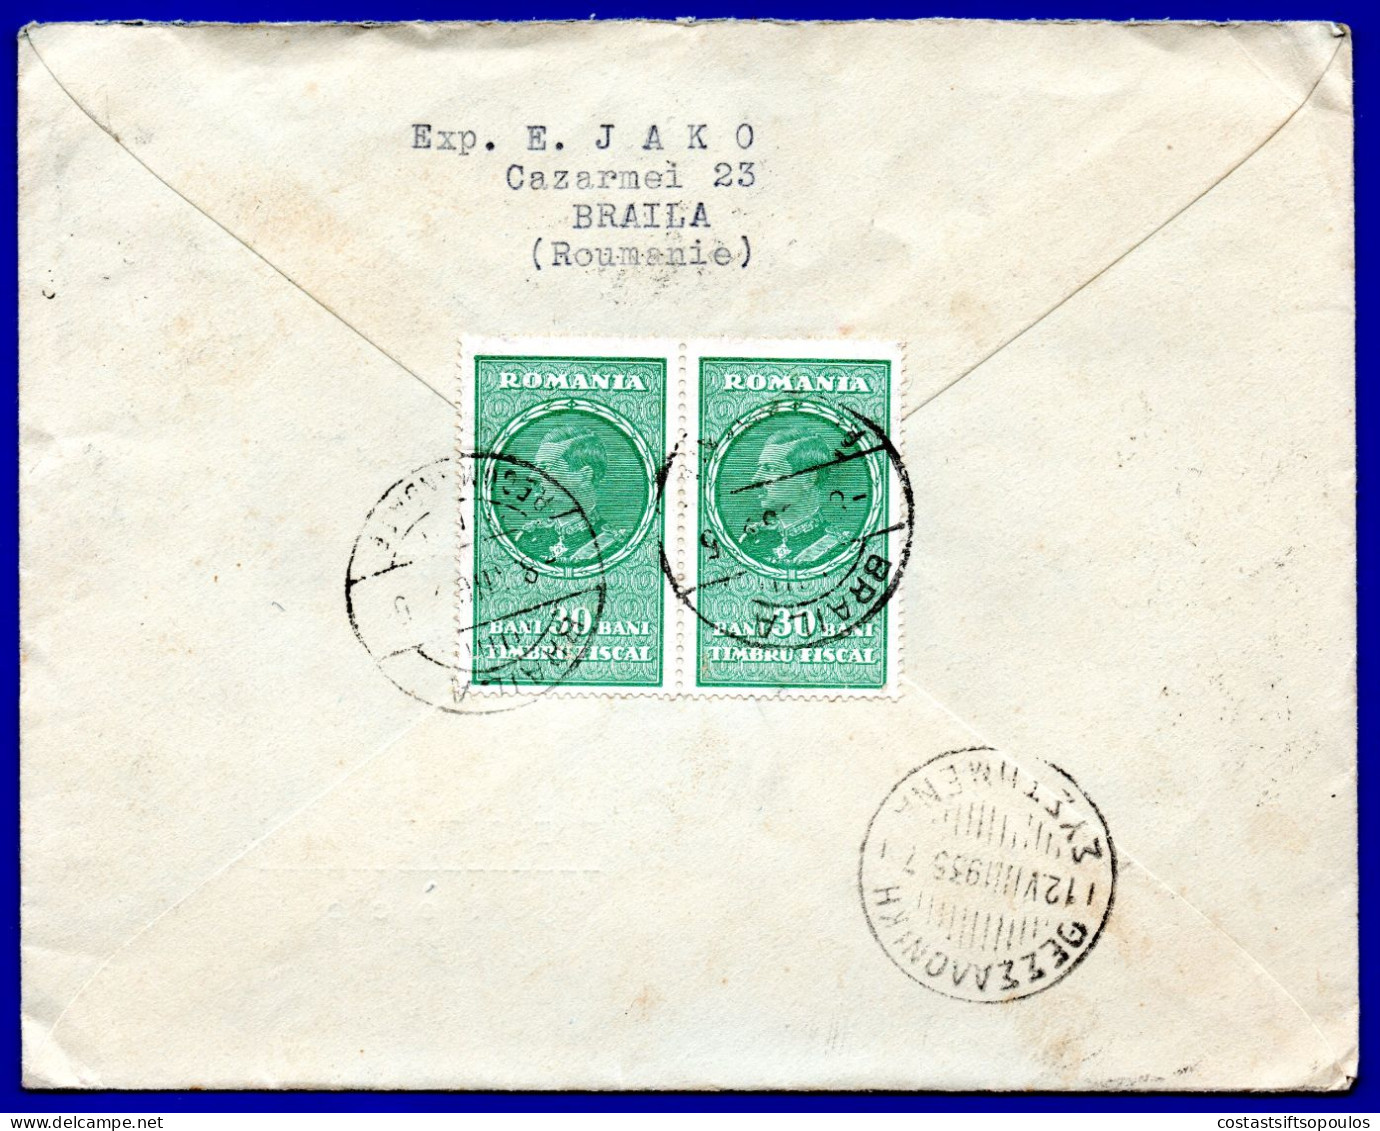 3247.VERY NICE REGISTERED COVER TO GREECE, REVENUES ON BACK. - Covers & Documents